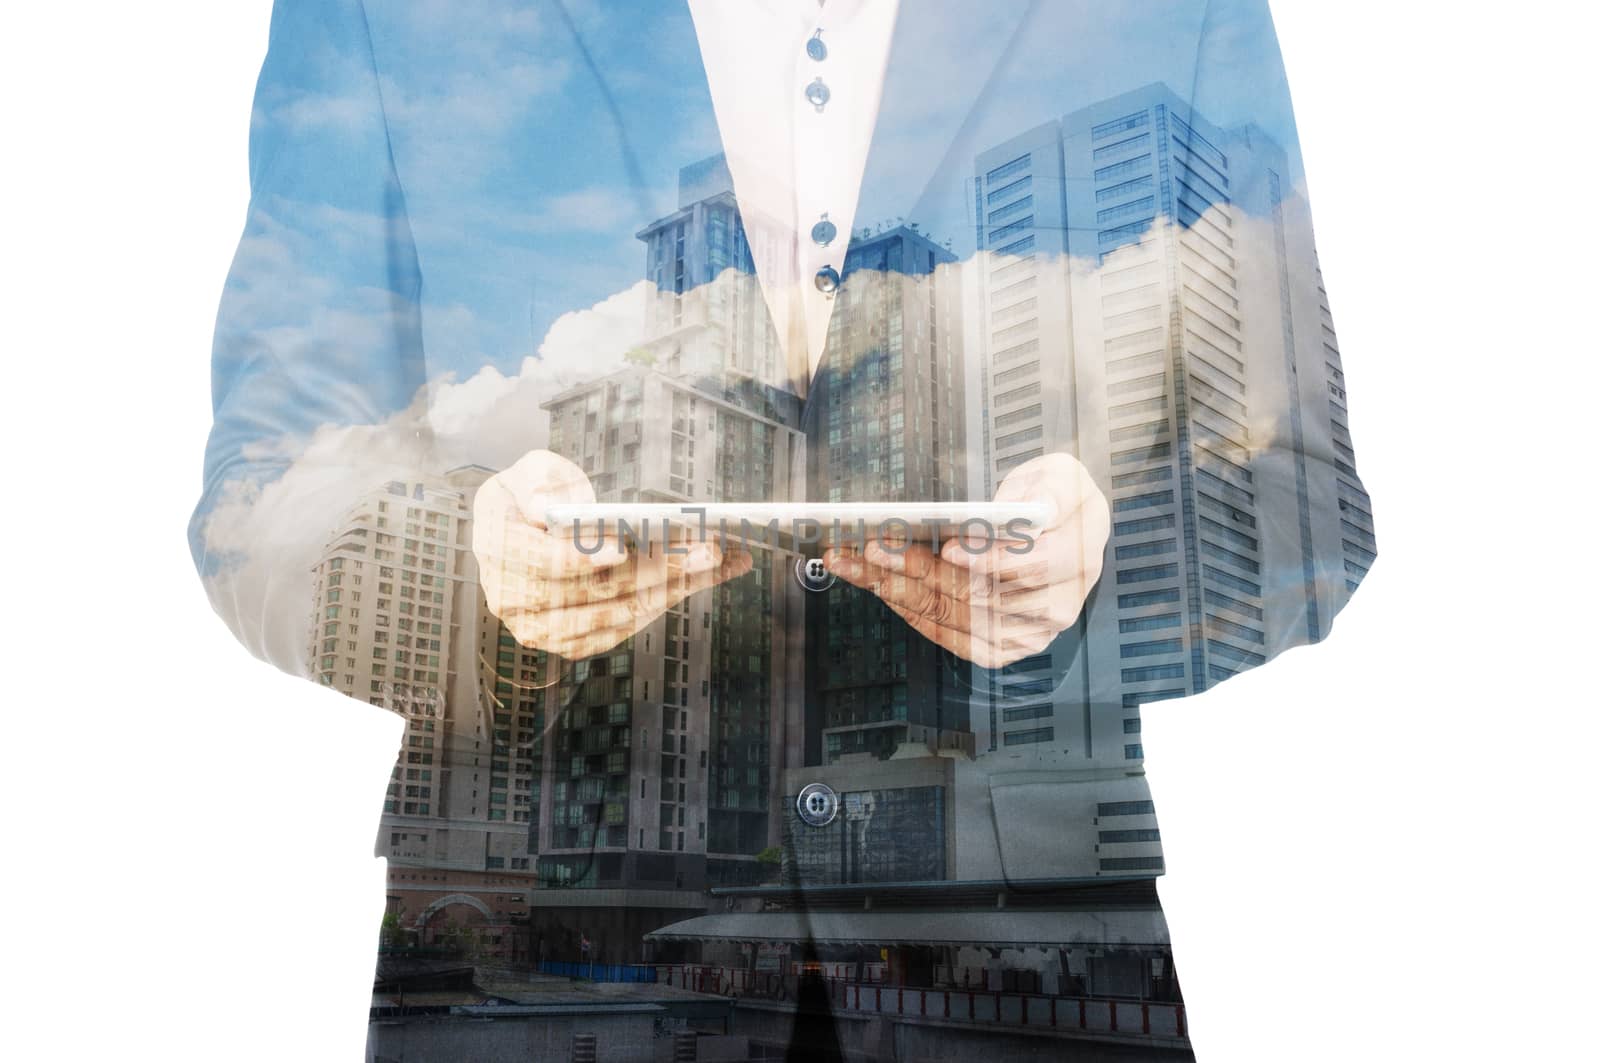 Double exposure of a businessman and a city using a tablet over white background as Business Technology Concept